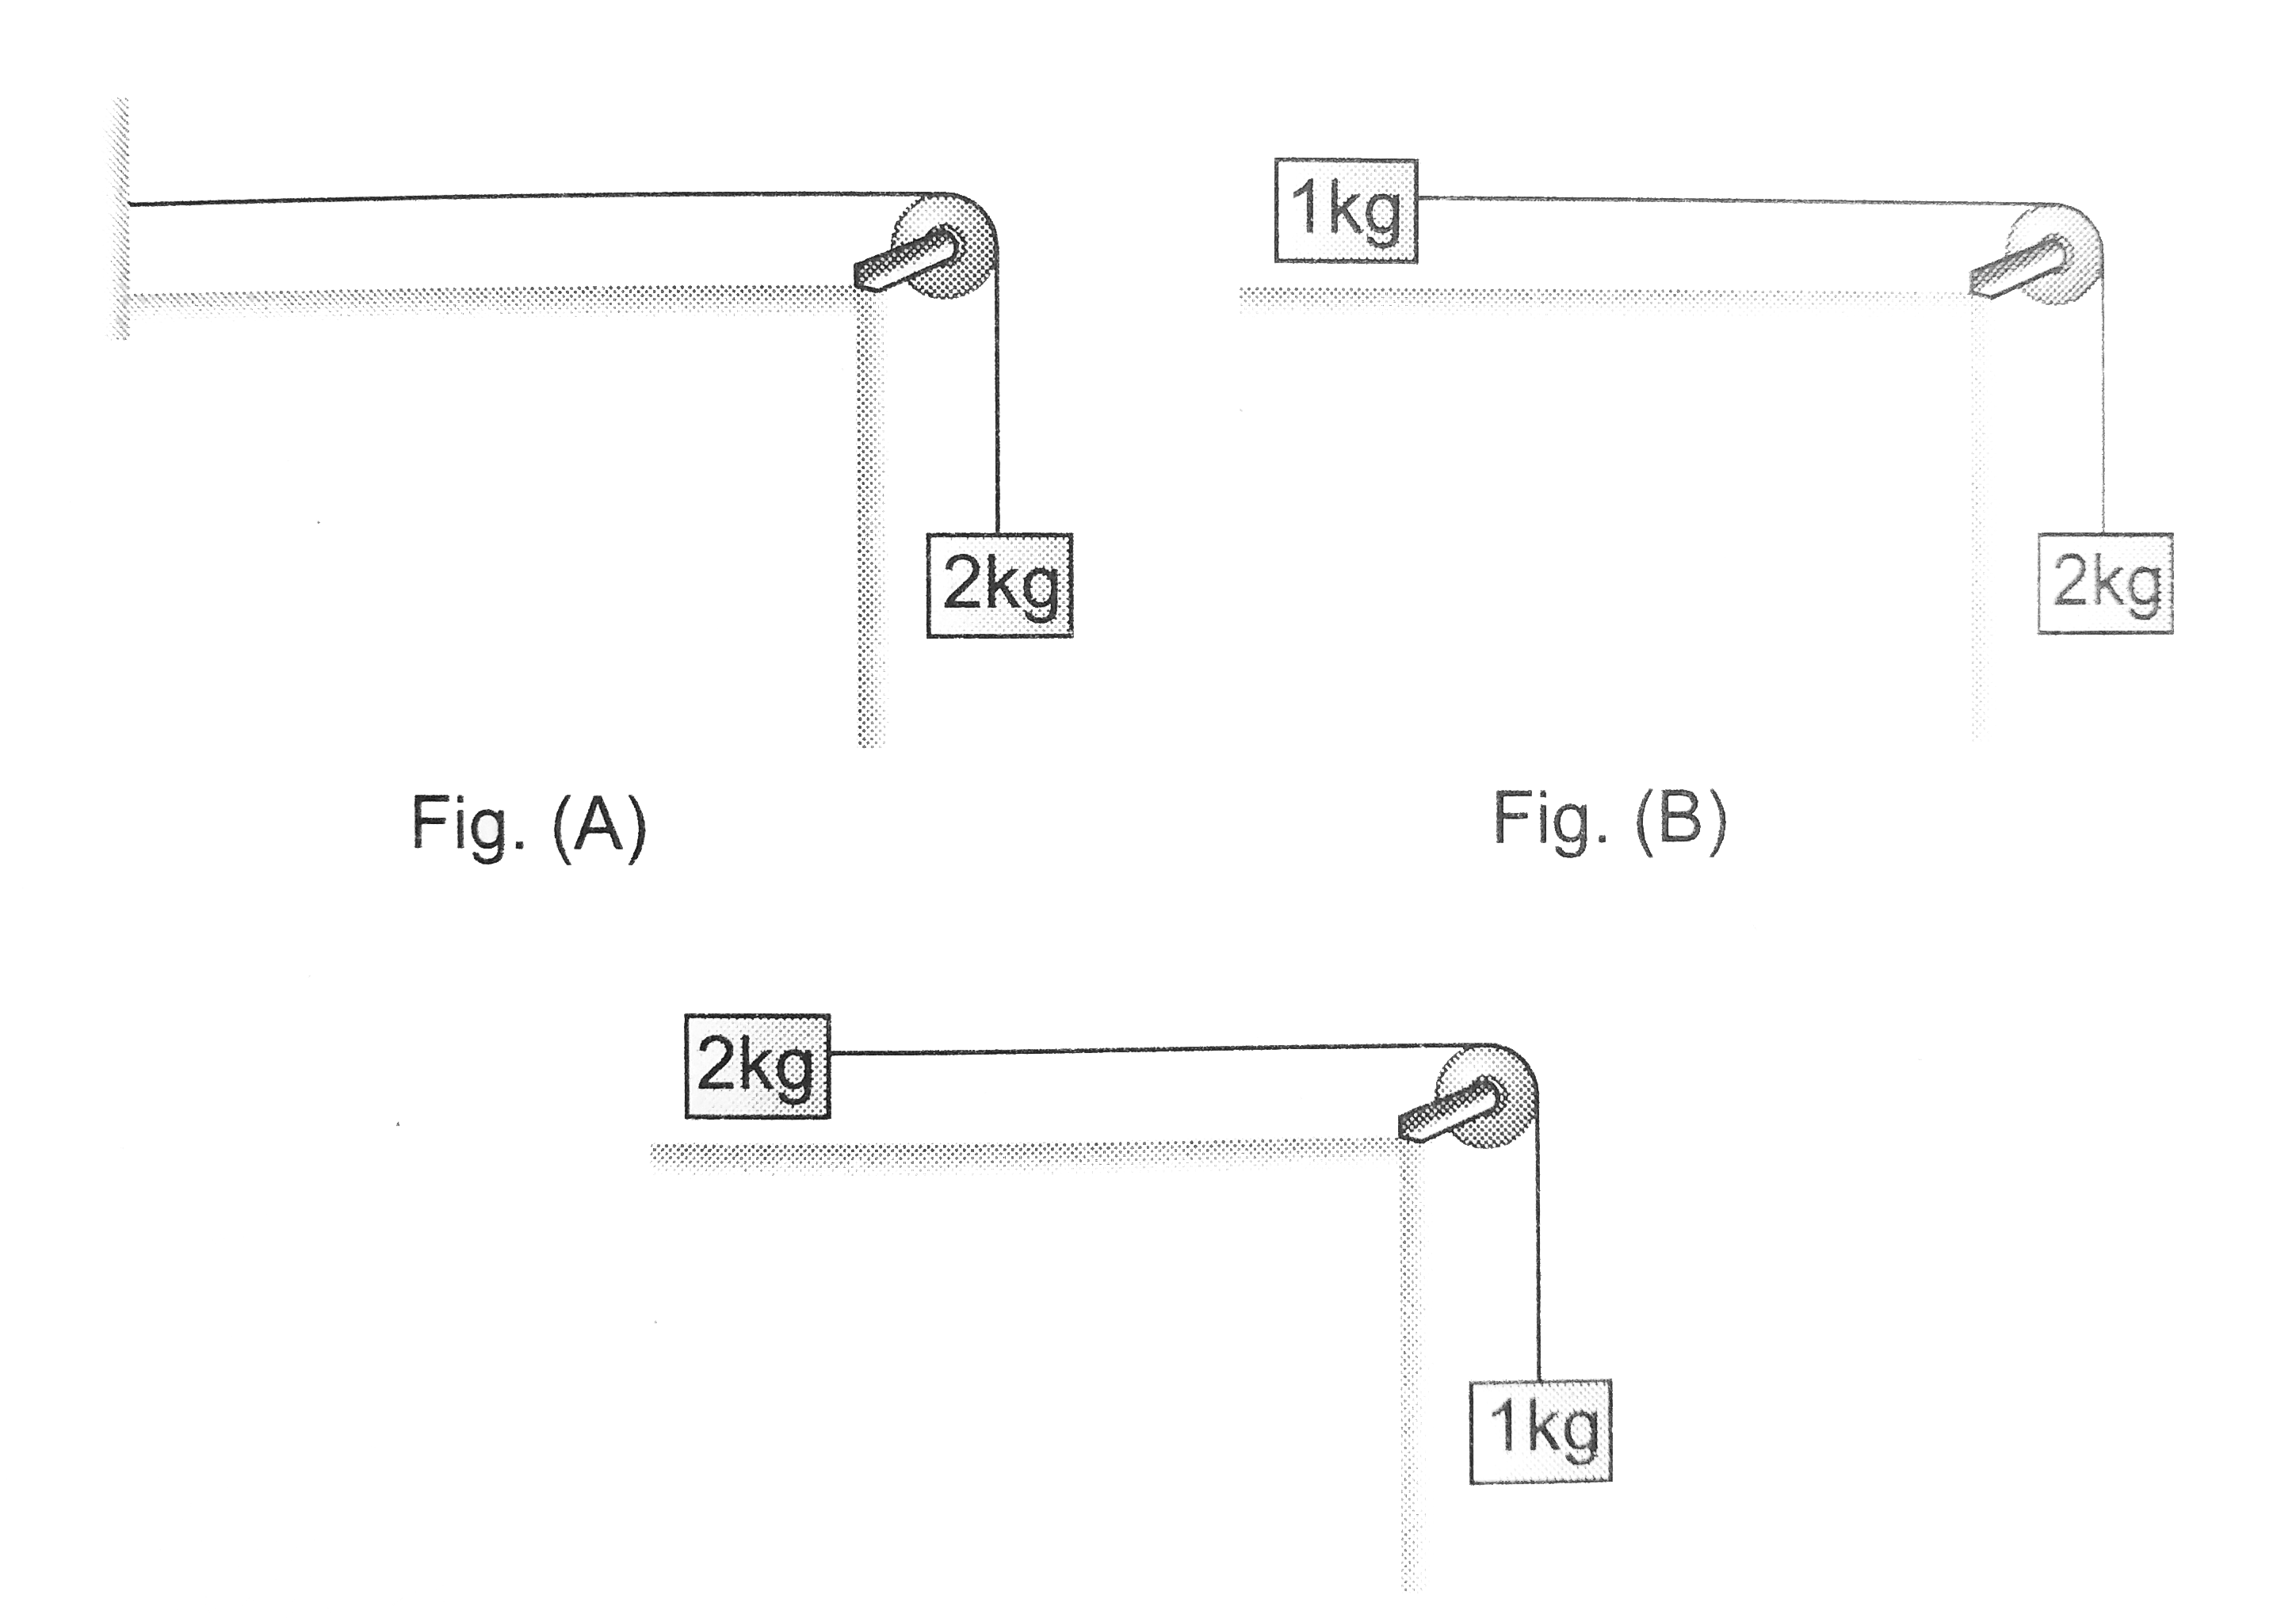 Consider the three cases given in figures shown. Assume the friction to be absent everywhere and the pulleys to be light, the string connecting the blocks to other block or fixed vertical wall to be light and inextensible. Let T(A) , T(B) and T(C) be the etnsion in the strings in figure A , figure B and figure C respectively. Then pick the correct comparison between the given tension (for the instant shown) from options below.